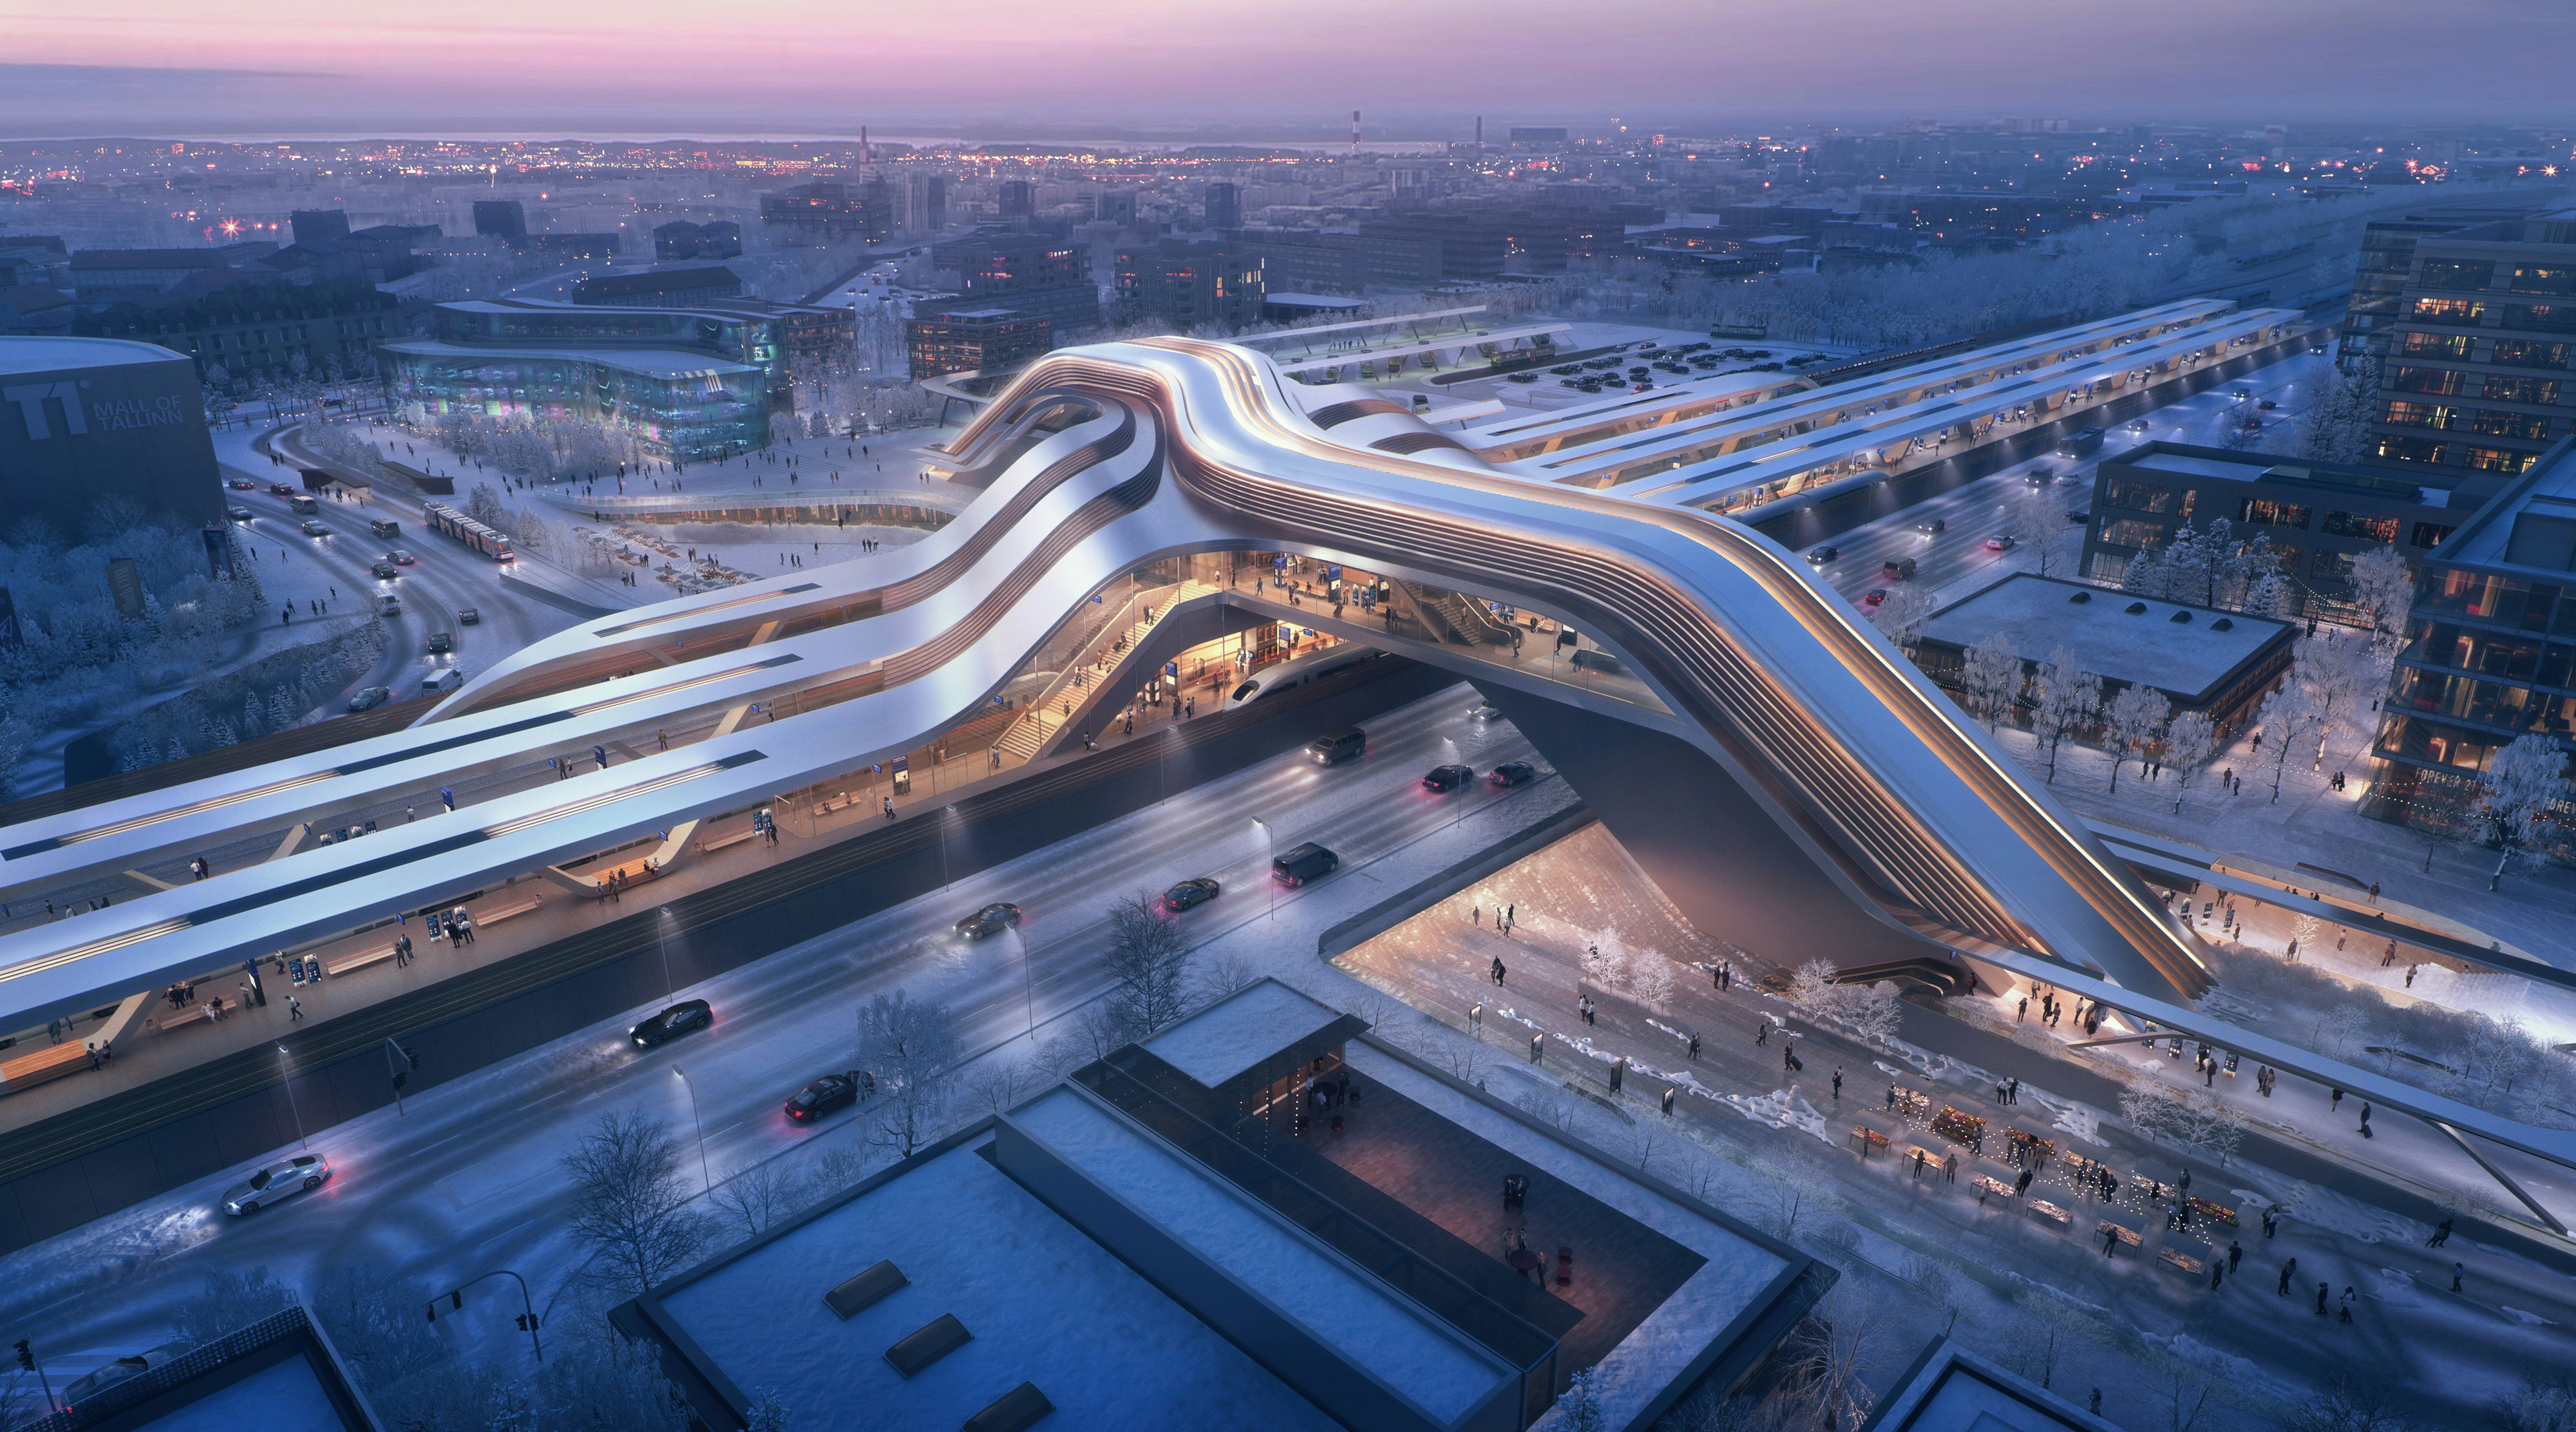 Rendering of a futuristic-style rail station